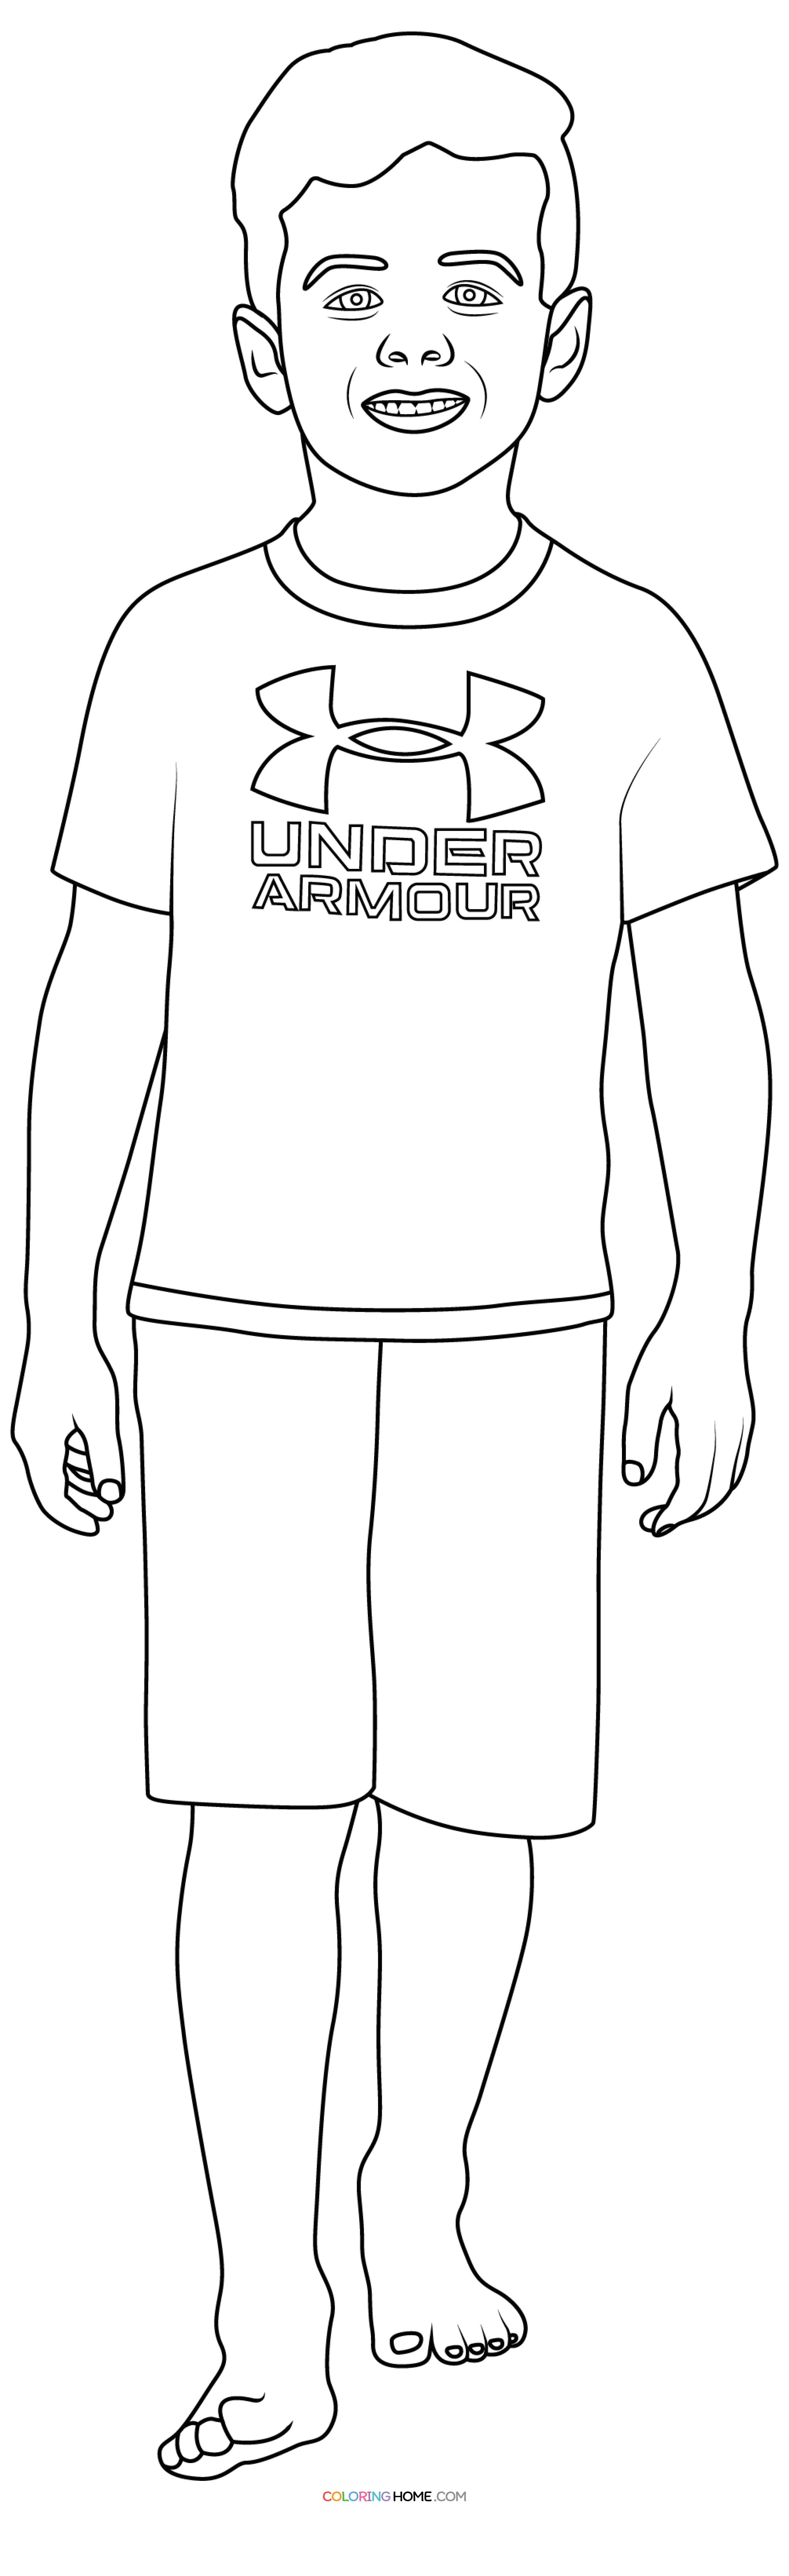 Under Armor Coloring Page - Coloring Home